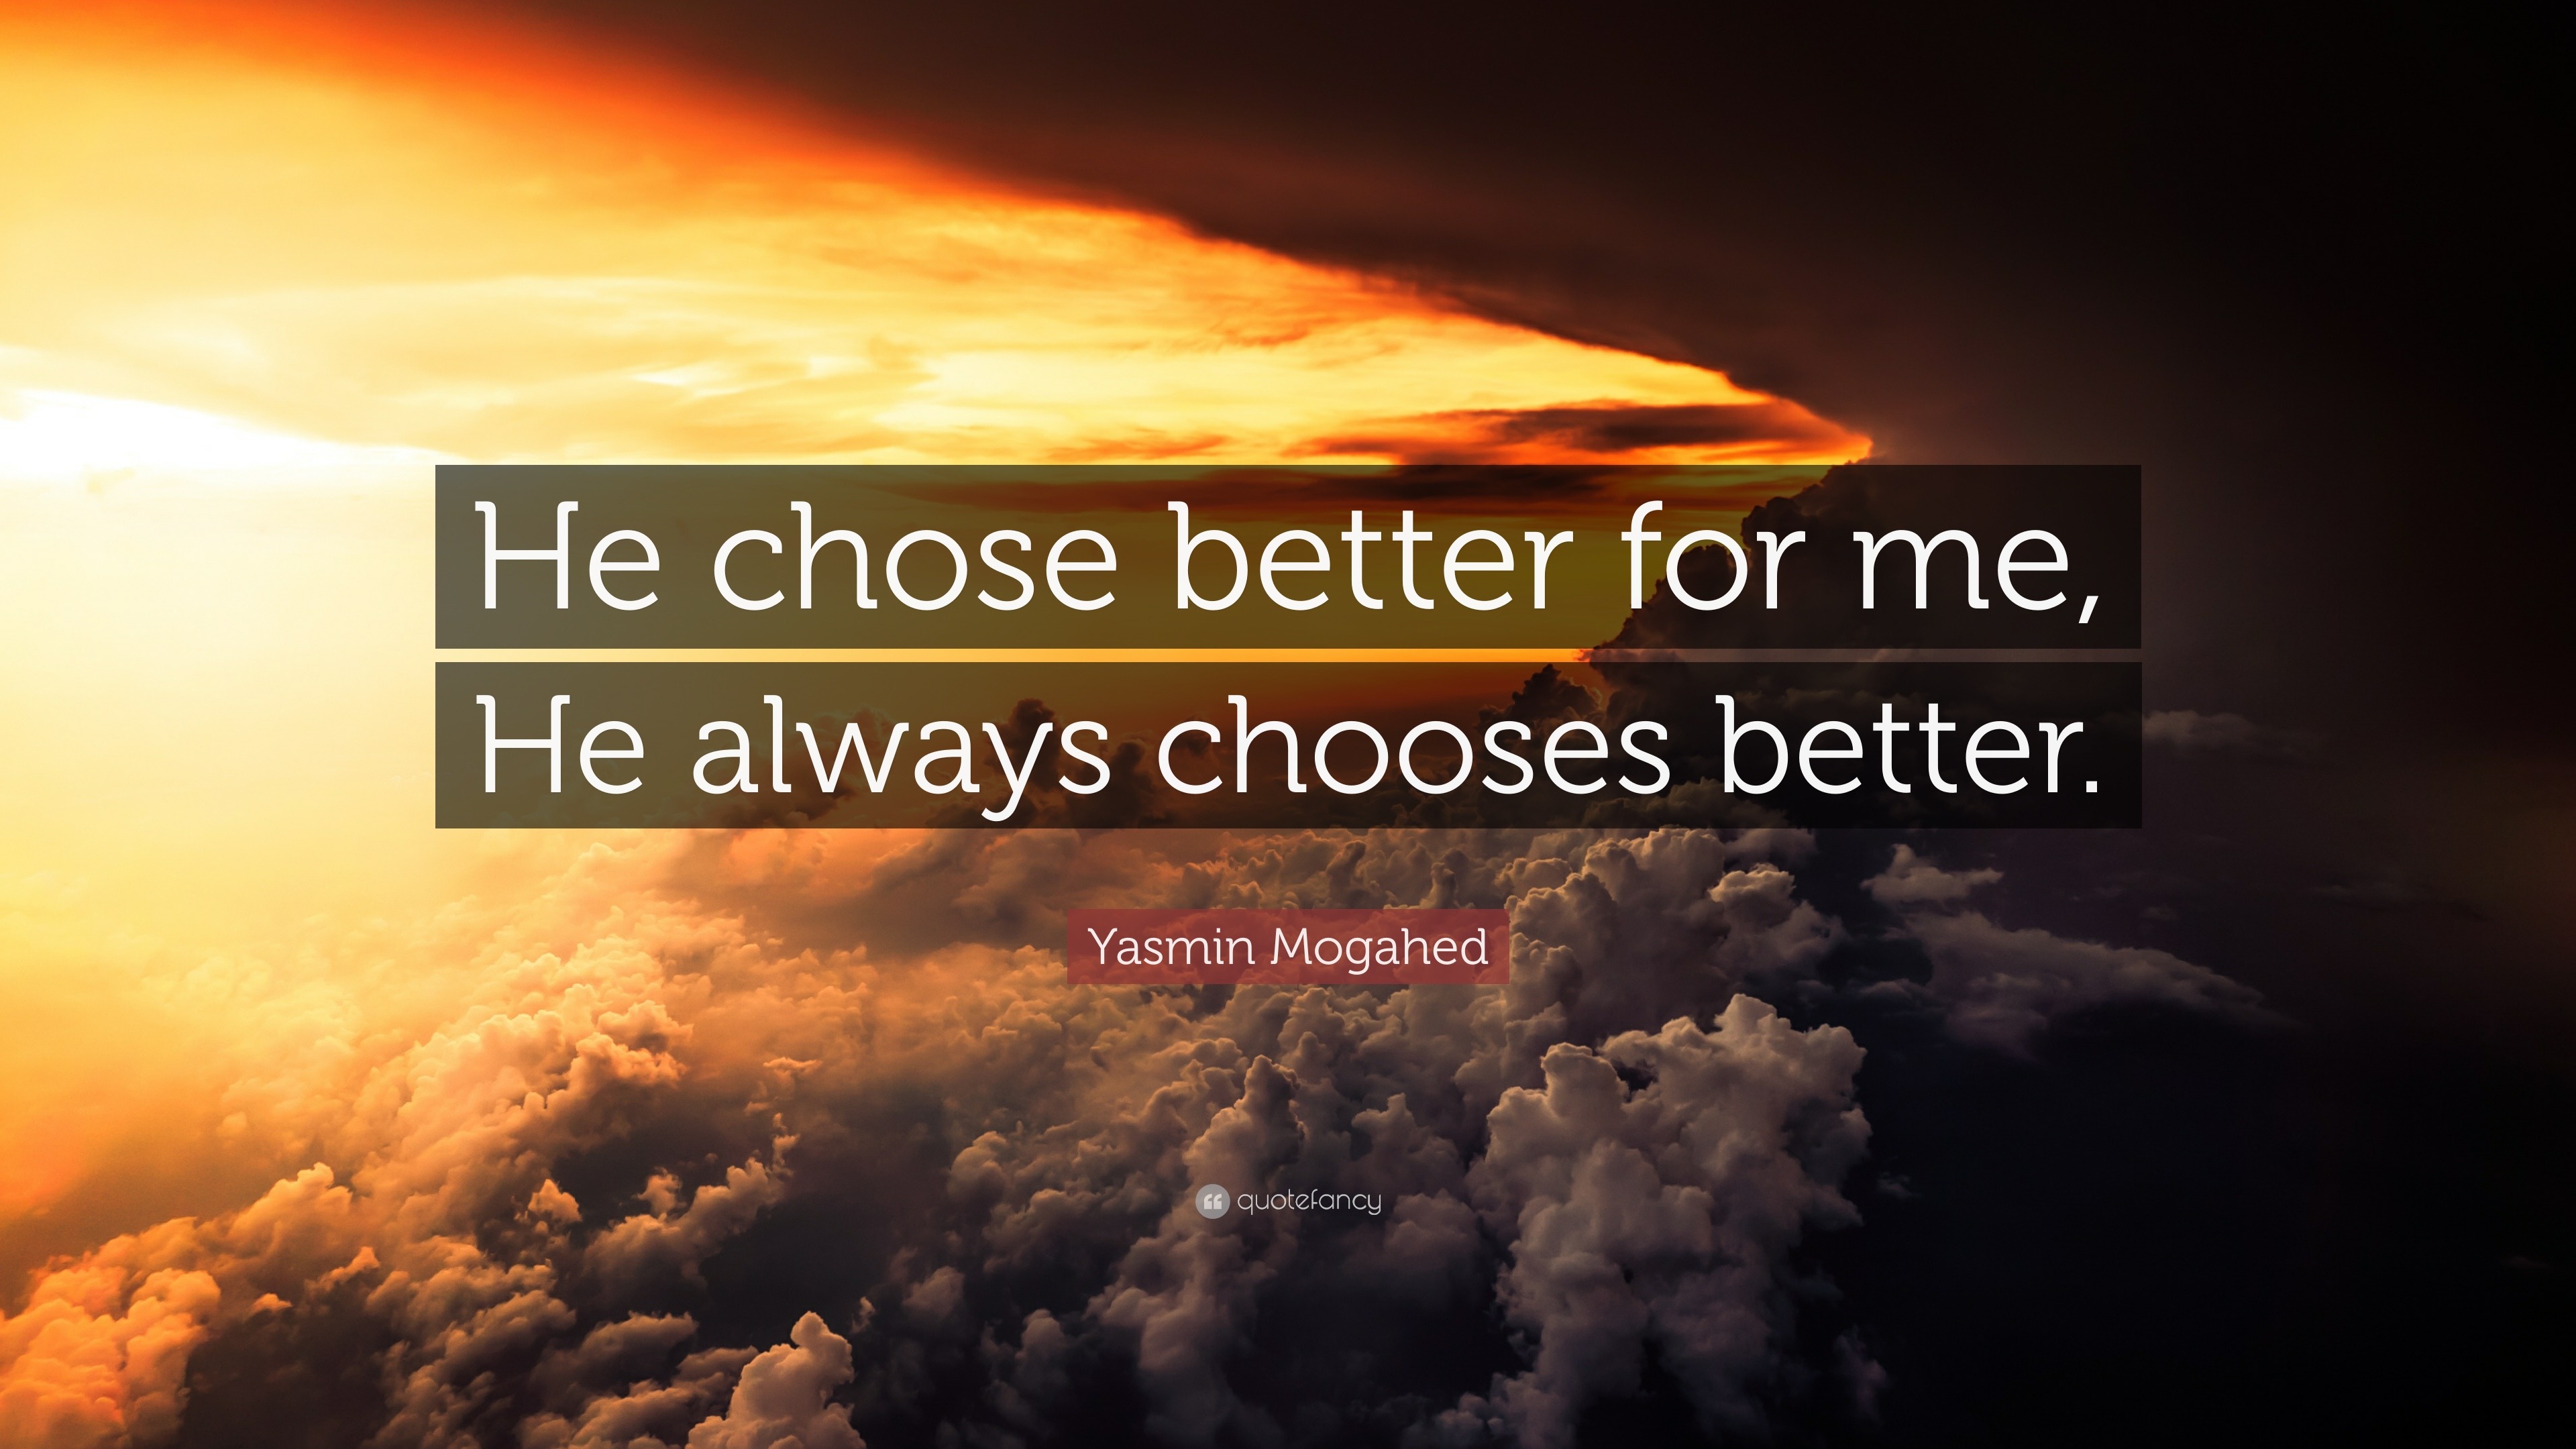 Yasmin Mogahed Quote: “He chose better for me, He always chooses better.”